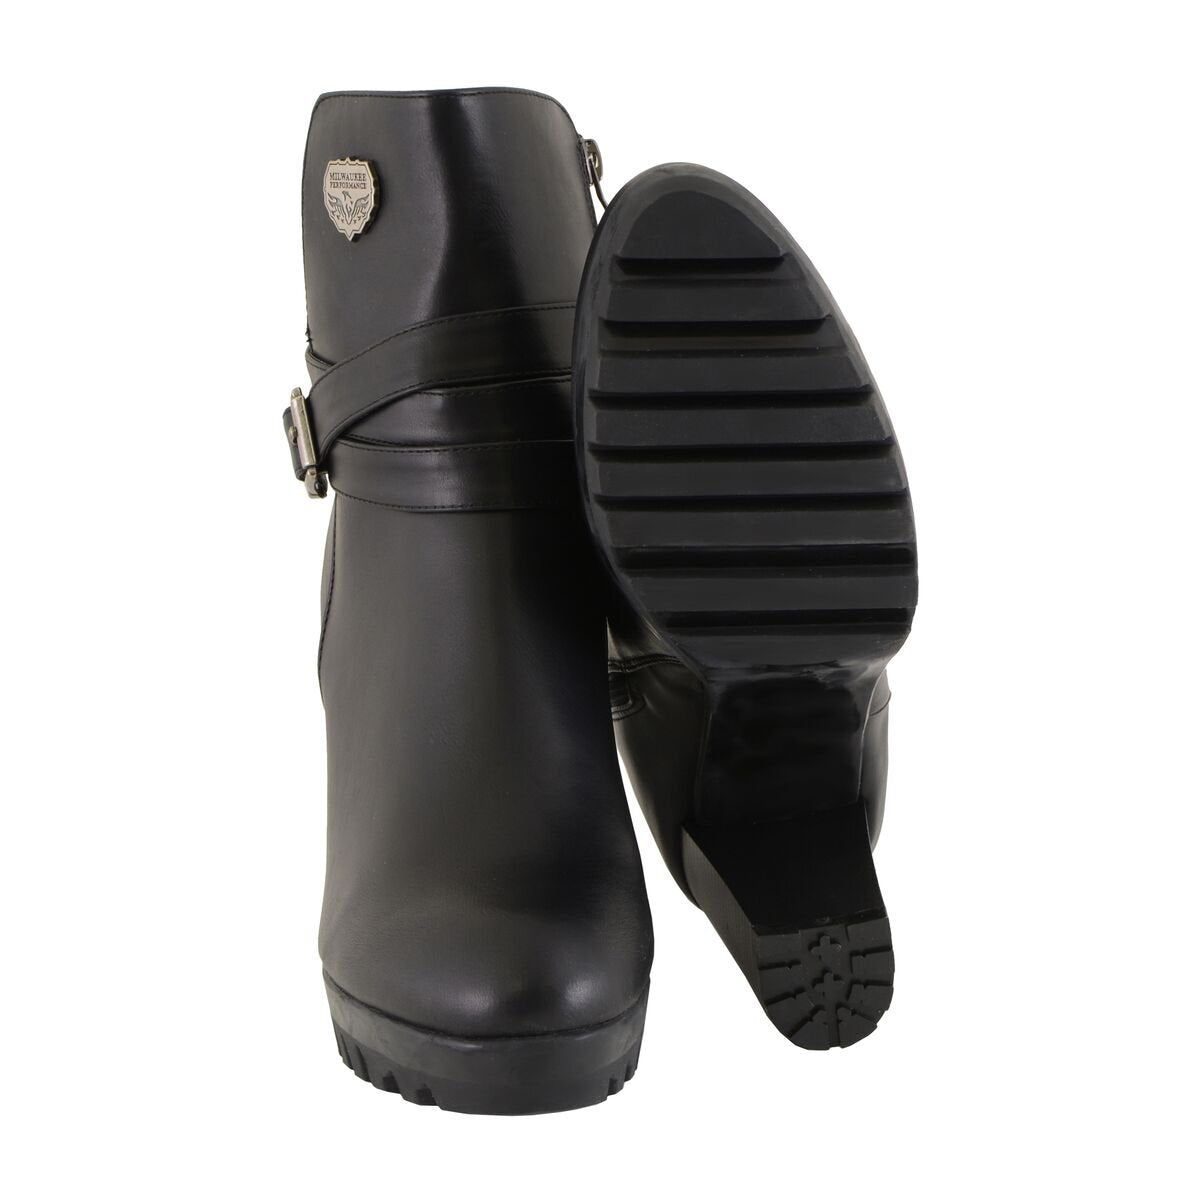 Milwaukee Performance MBL9435 Womens Black Double Strap Side Zipper Boots with Platform Heel